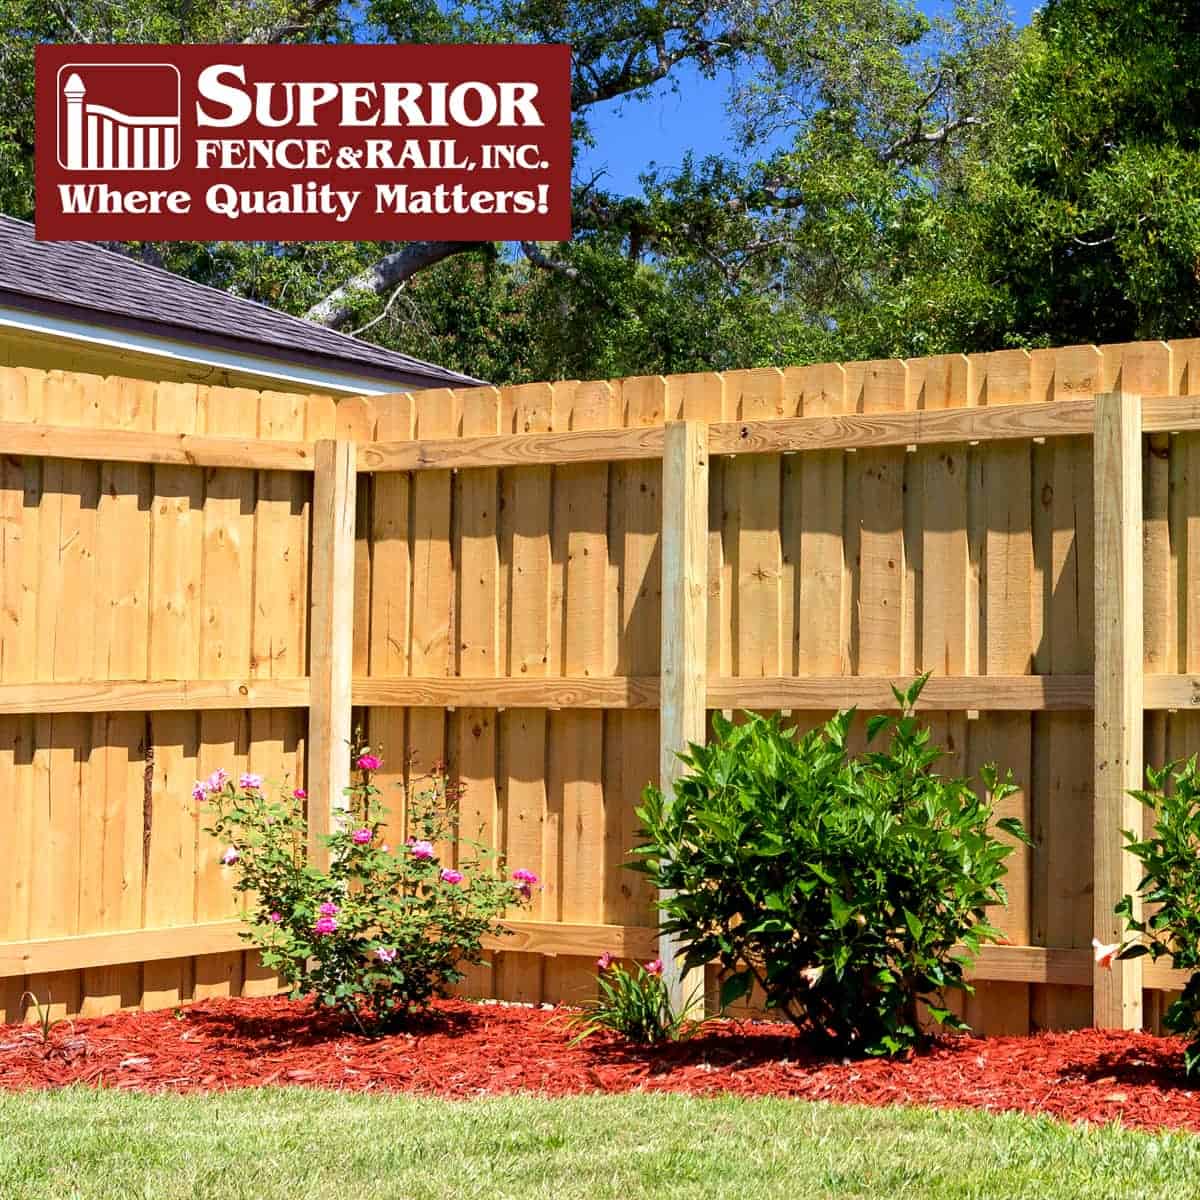 Depew fence company contractor